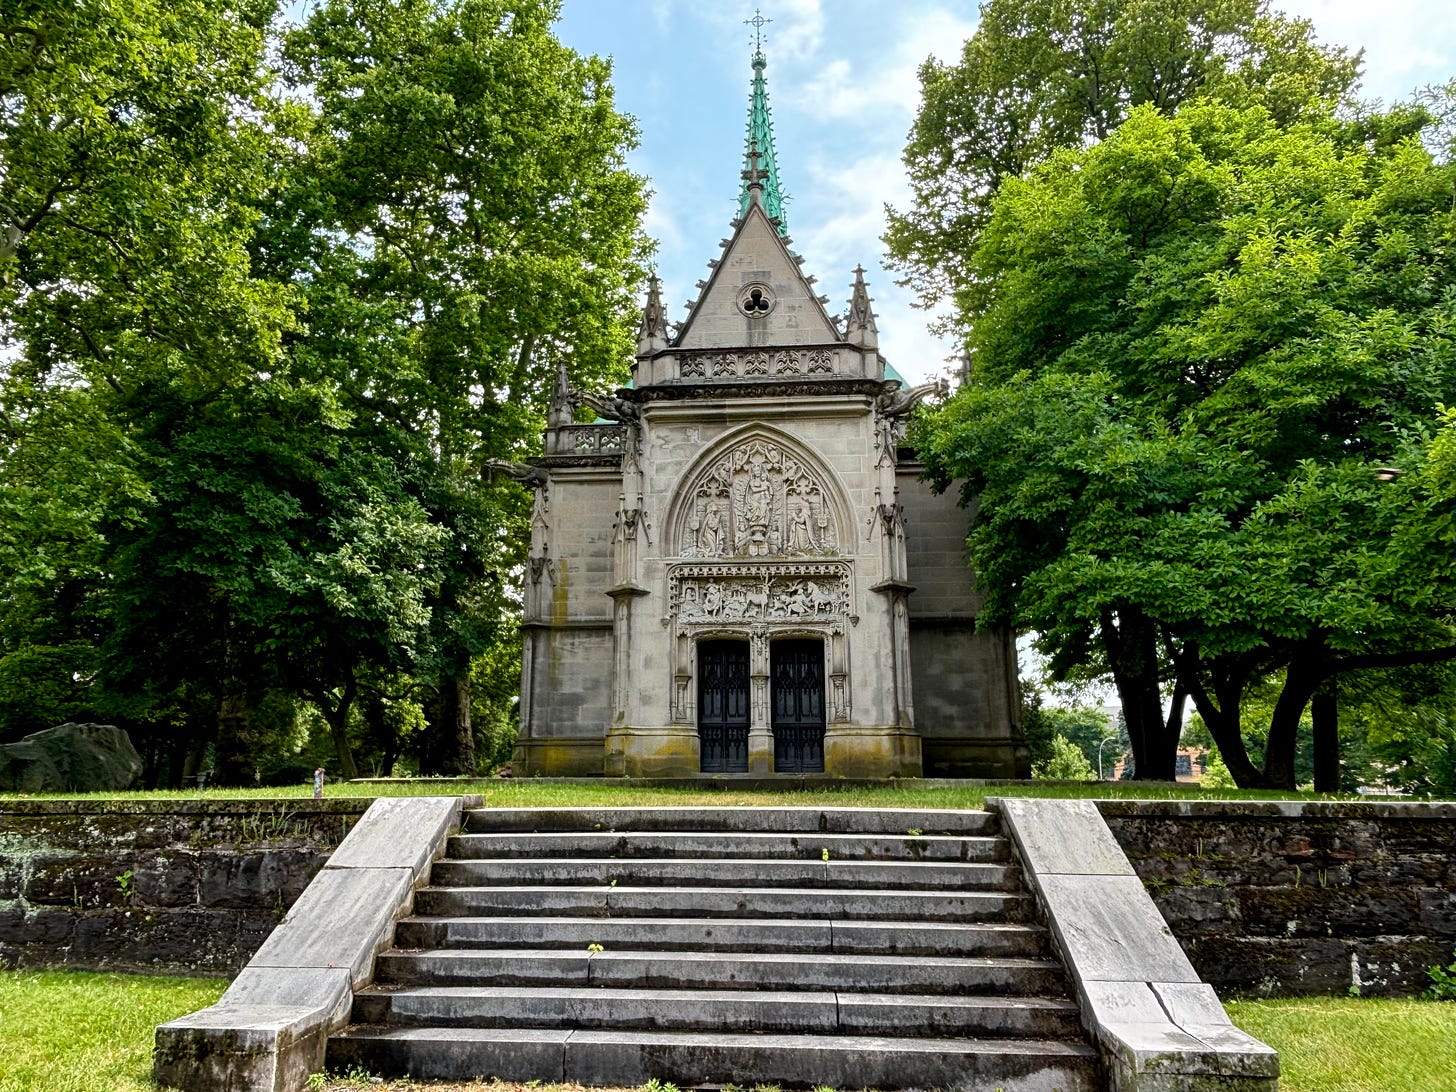 An ornate-style chapel with multiple relief sculptures set among green trees.